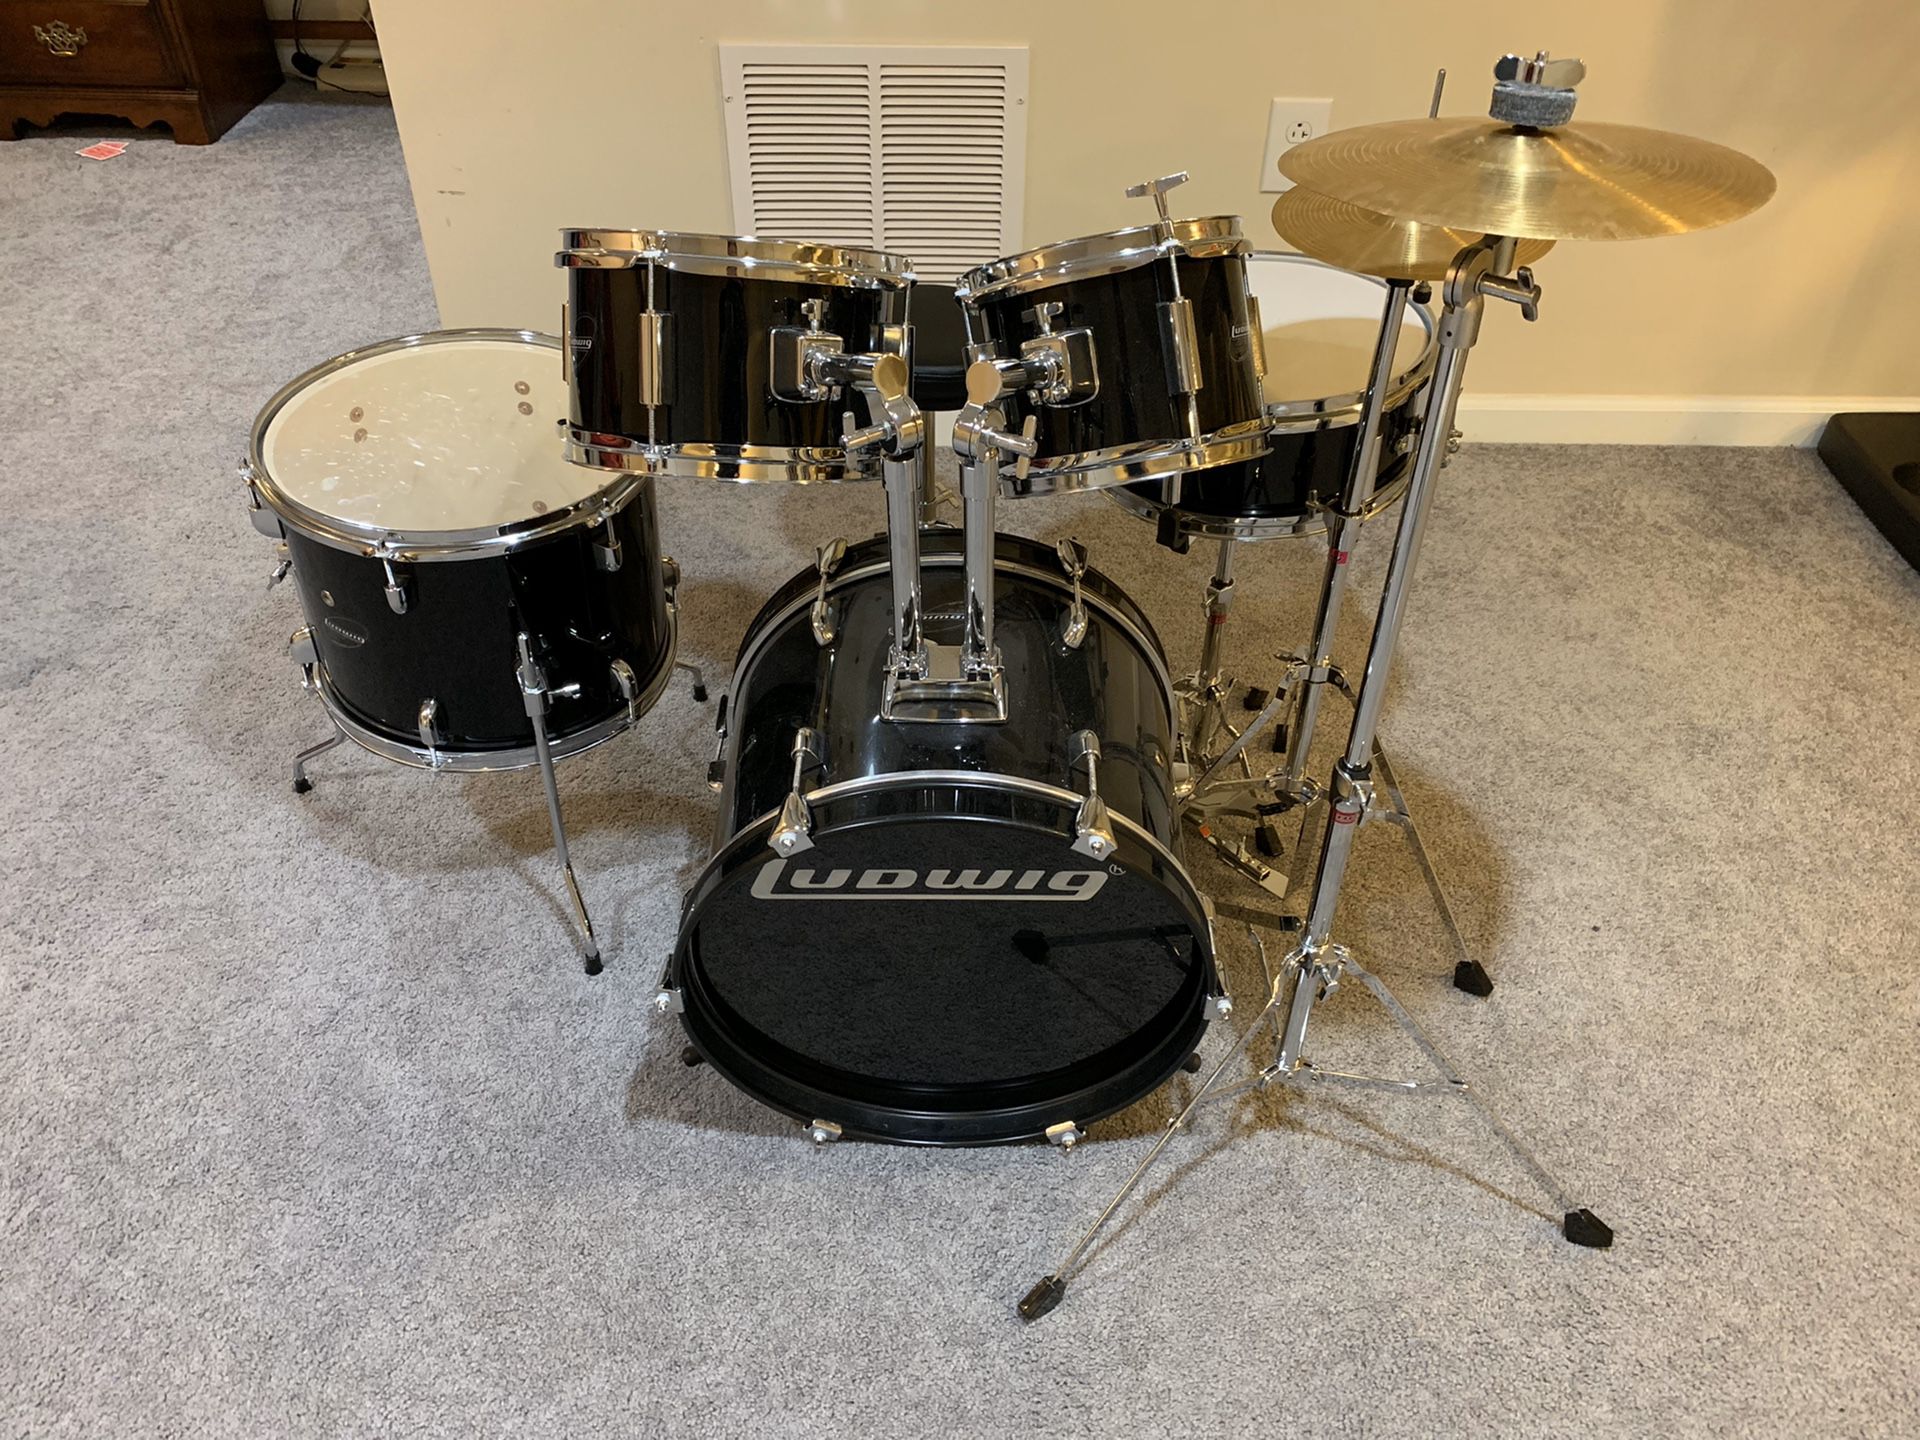 Fully assembled youth drum set